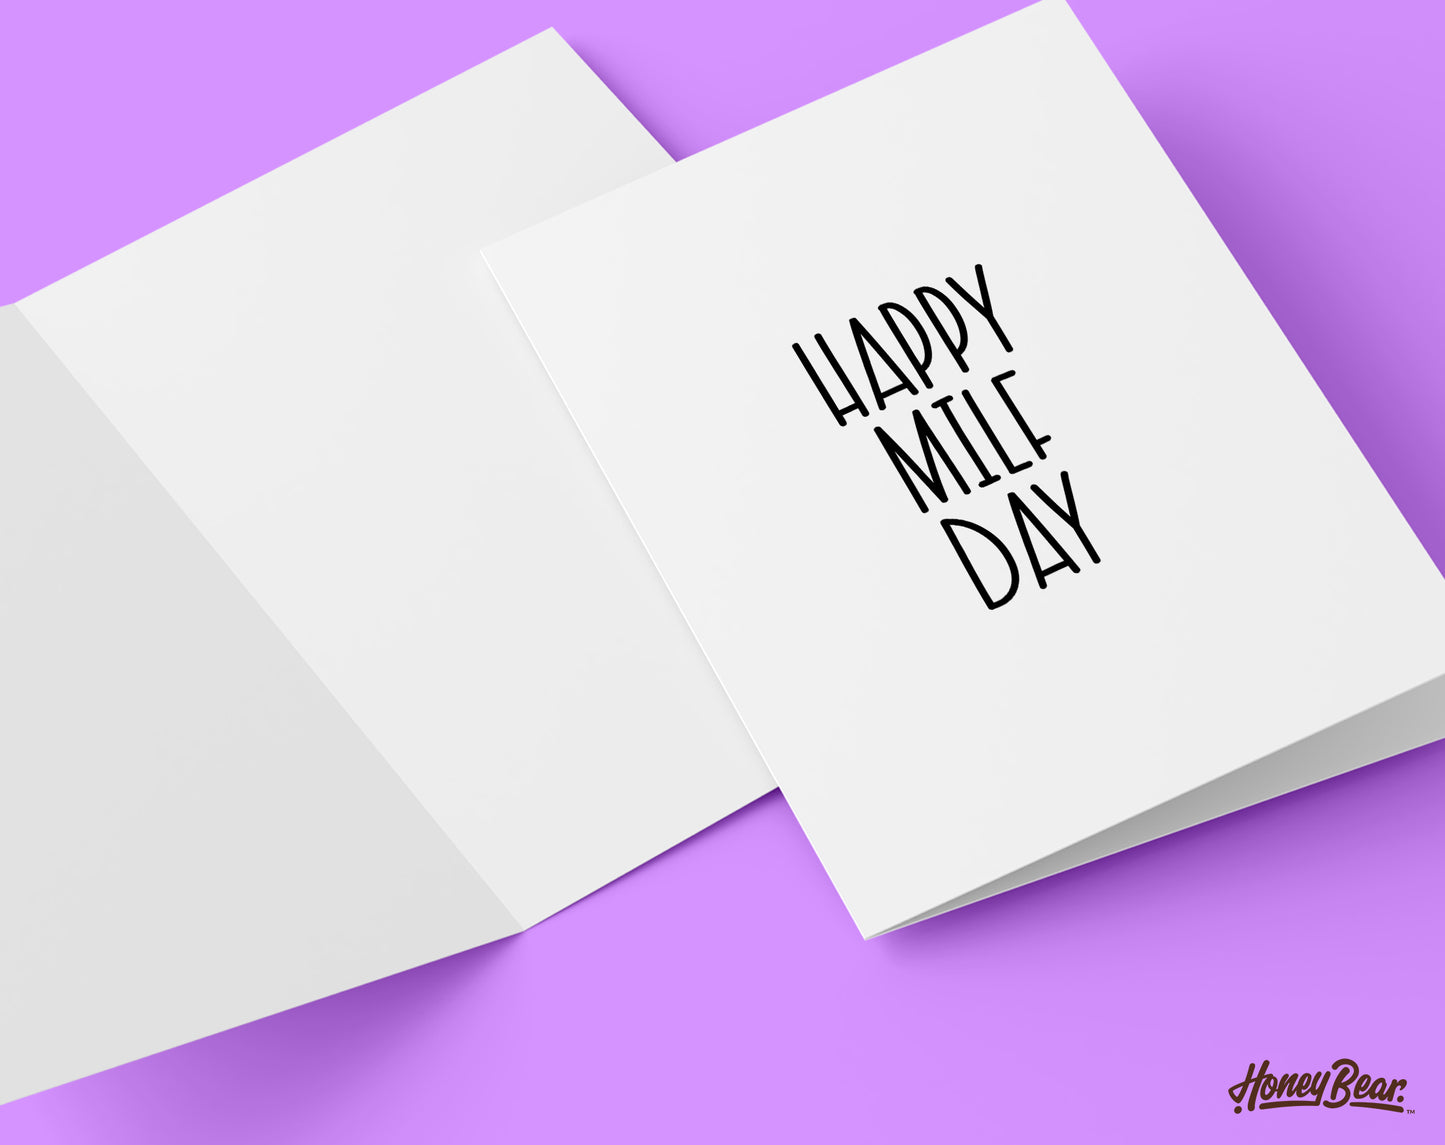 ‘Happy Milf Day' Mother's Day Card